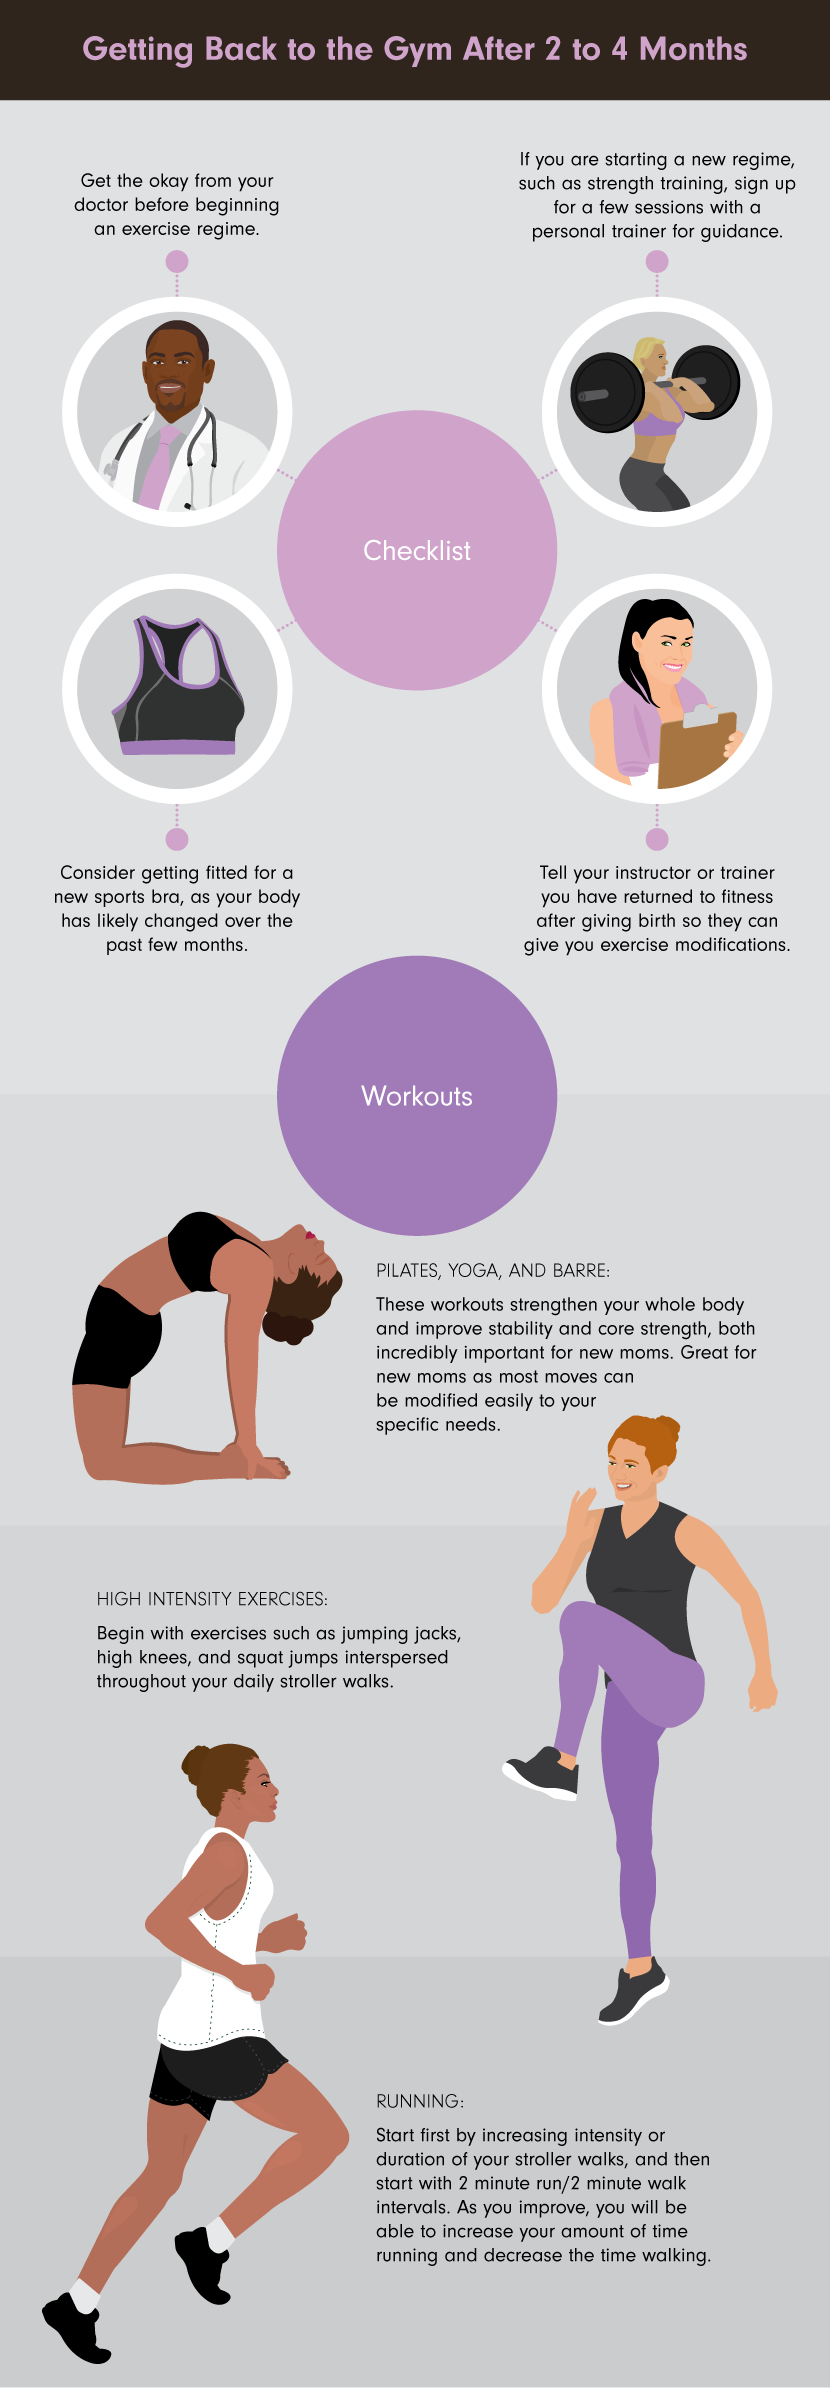 Getting Back to the Gym After 2 to 4 Months - A Guide to Postpartum Fitness